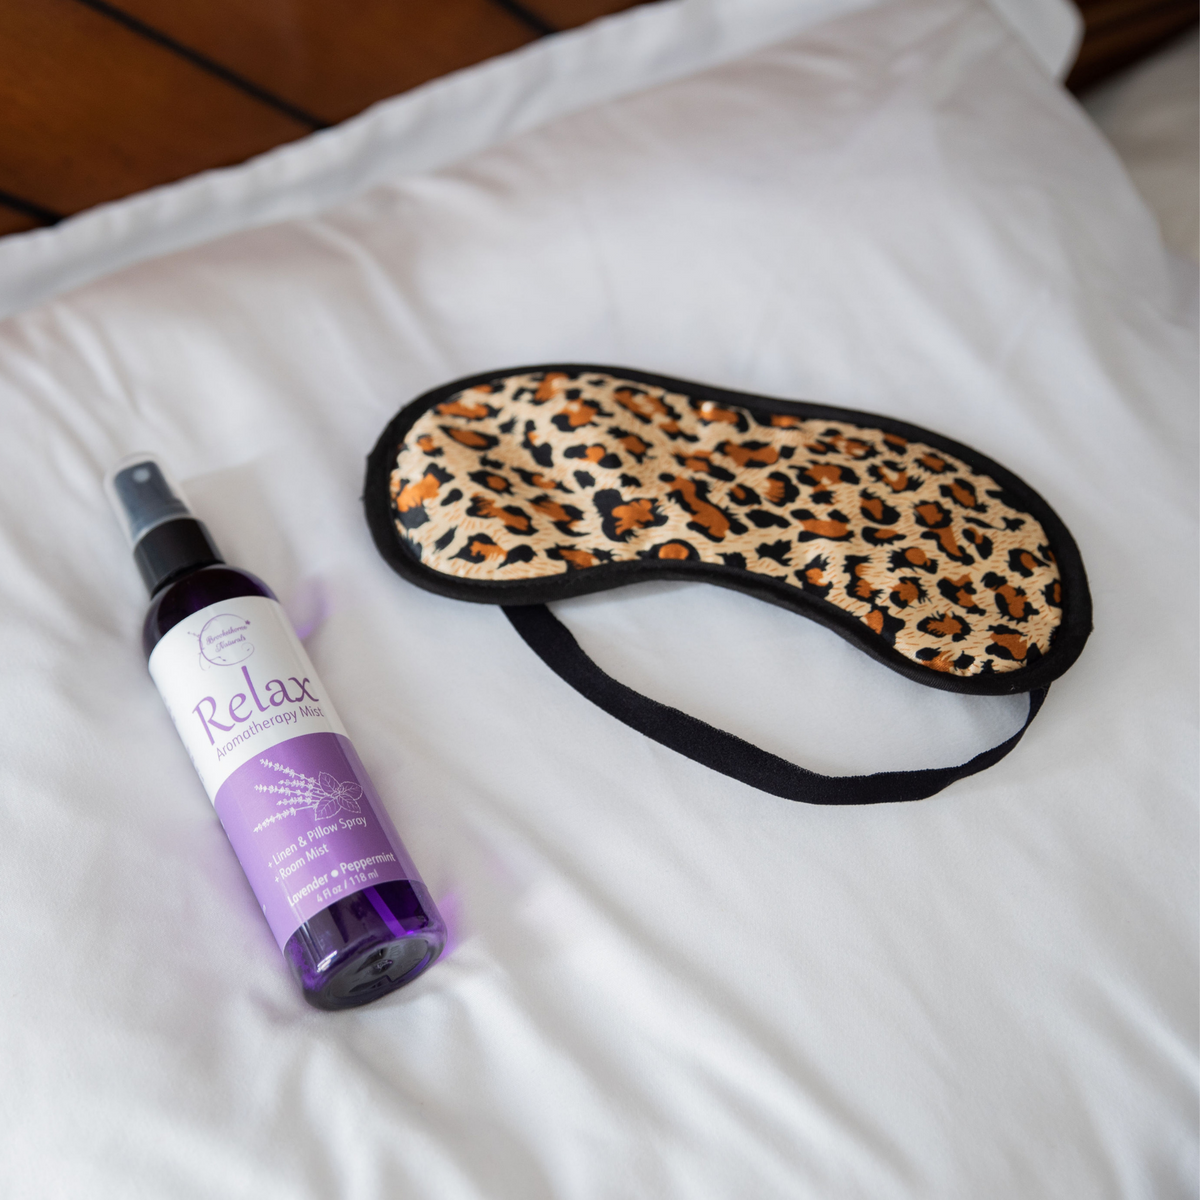 Relax Aromatherapy Mist laying on a pillow next to a cheetah printed sleep mask